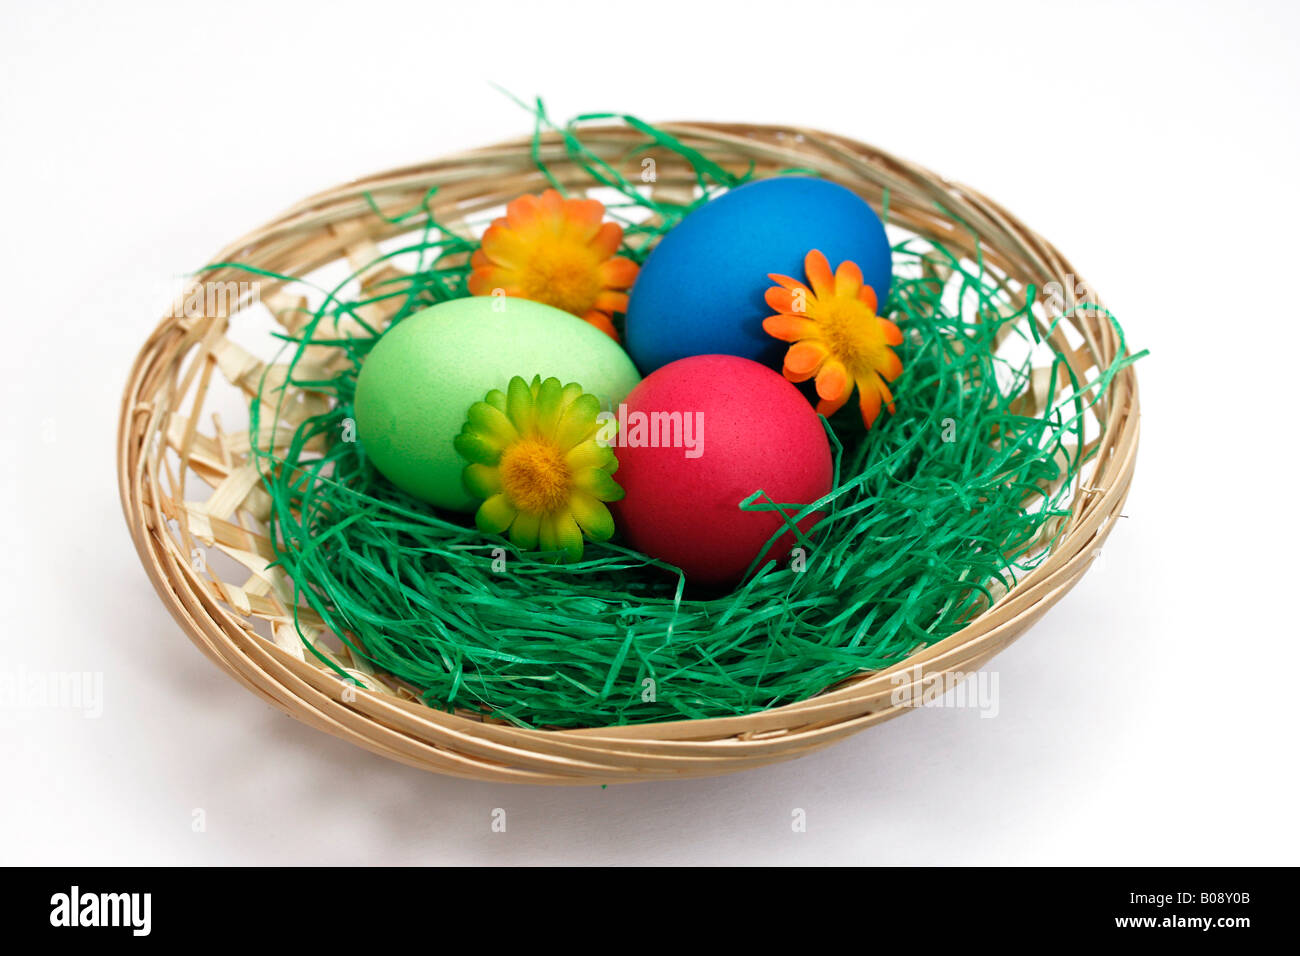 Pastel-coloured painted Easter eggs in basket with decorative flowers Stock Photo